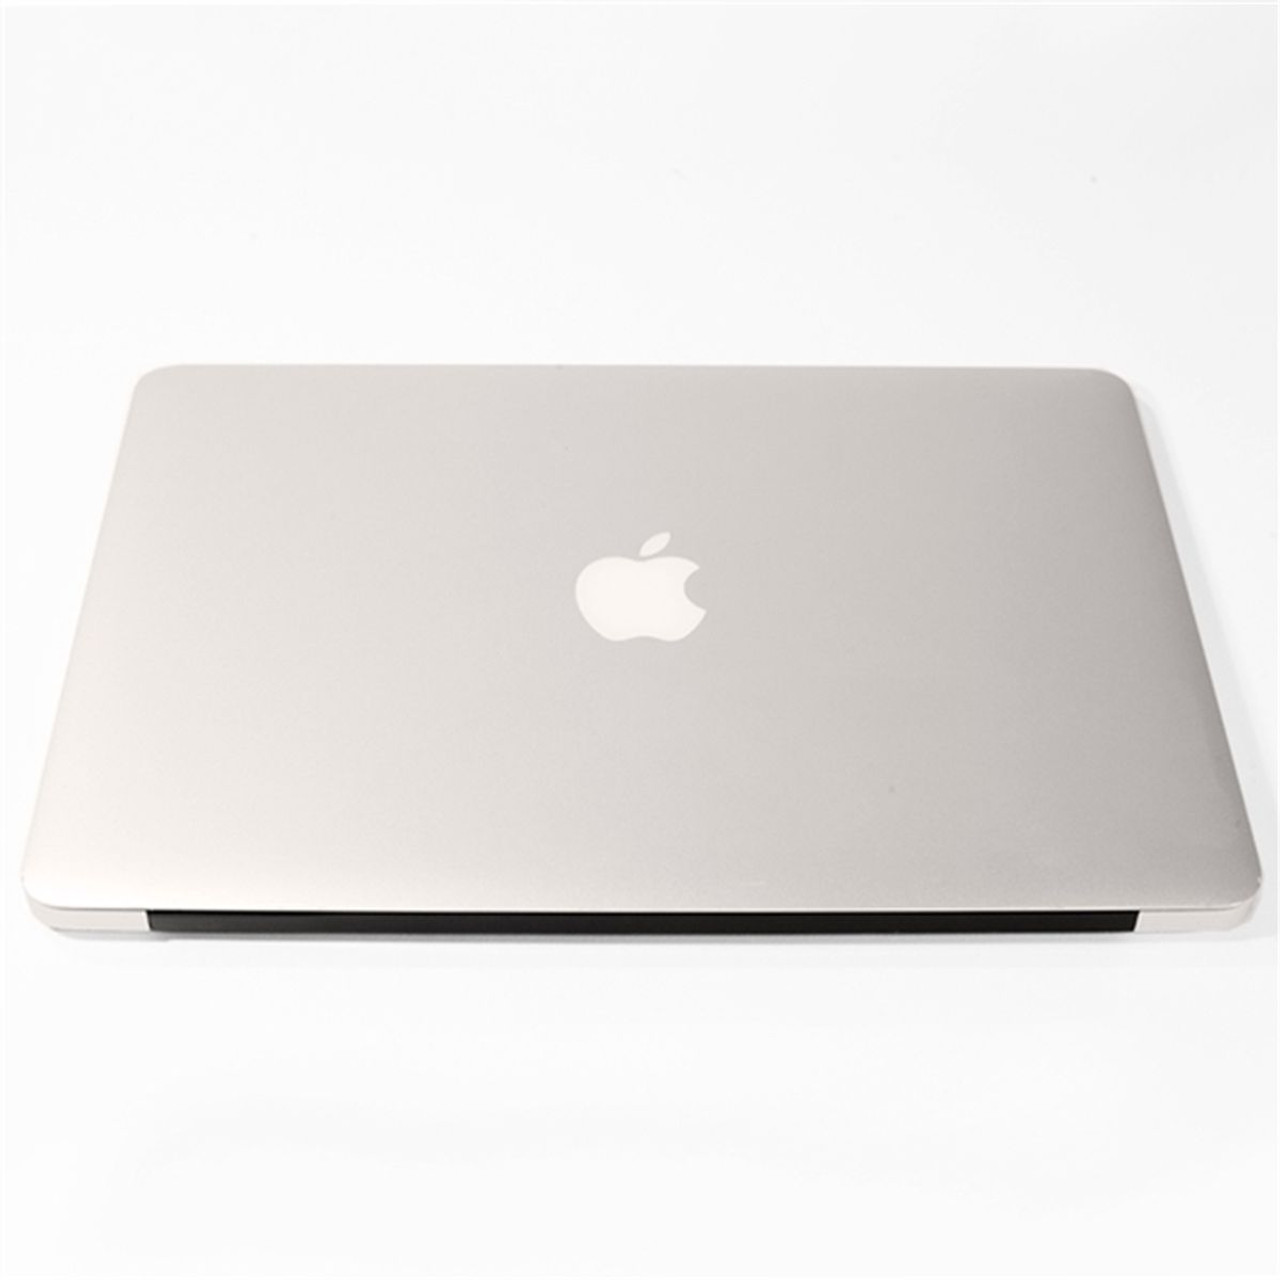 Apple MacBook Air A2179 13-inch (8GB 512GB SSD Core™) product image